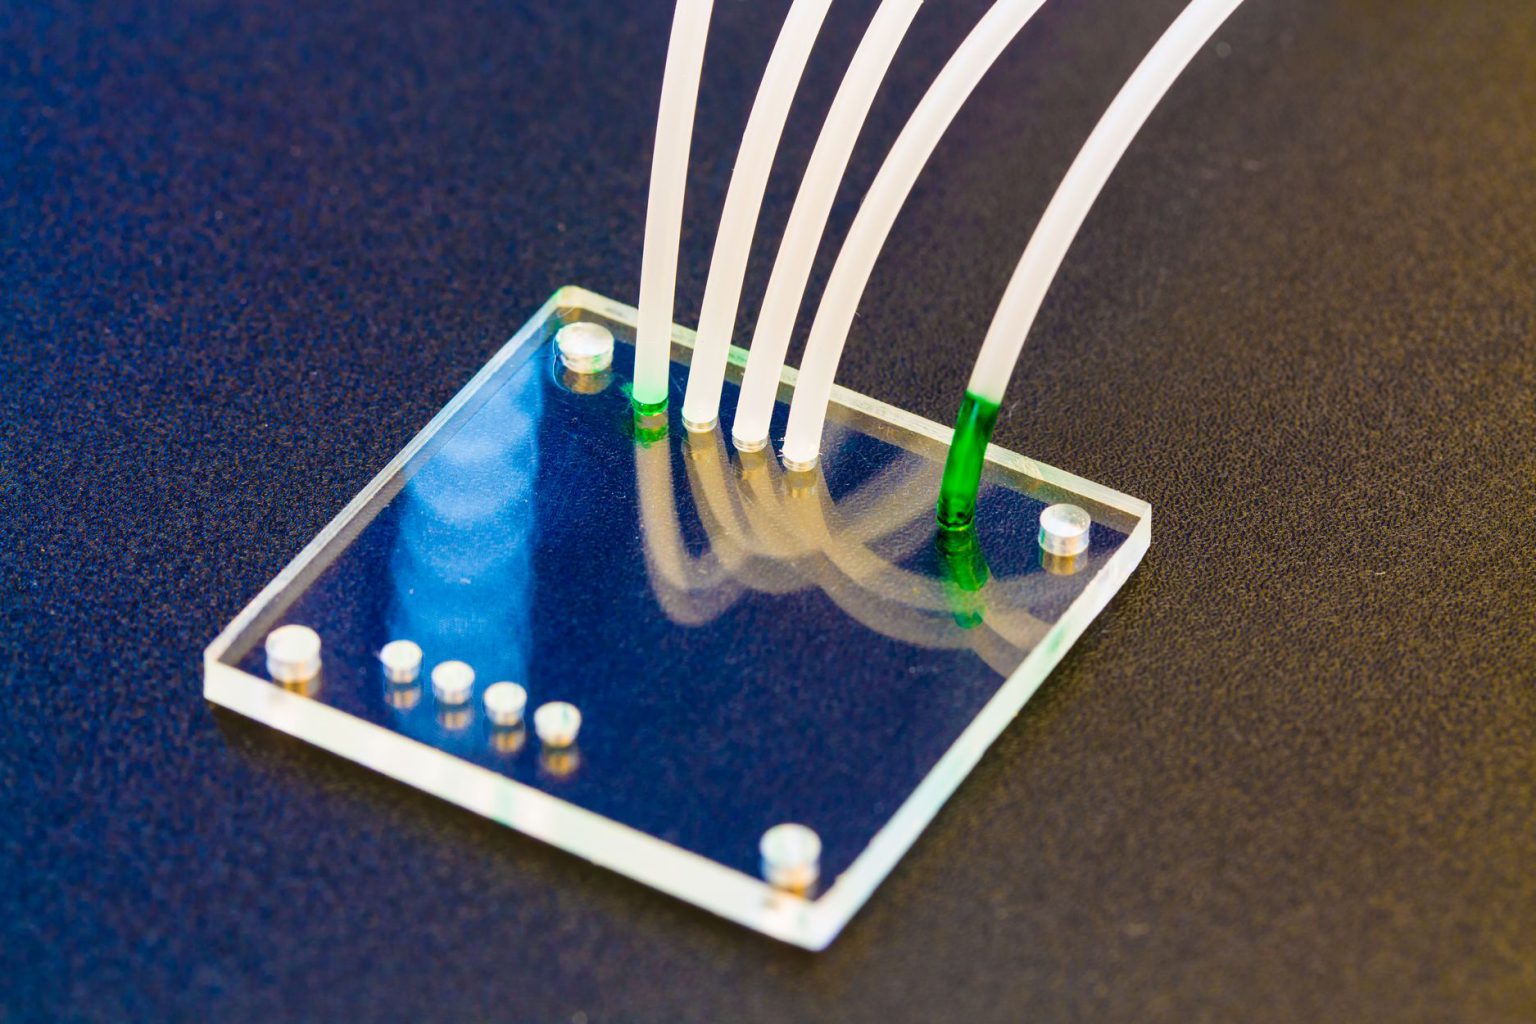 lab on chip is device integrates several laboratory processes in one device